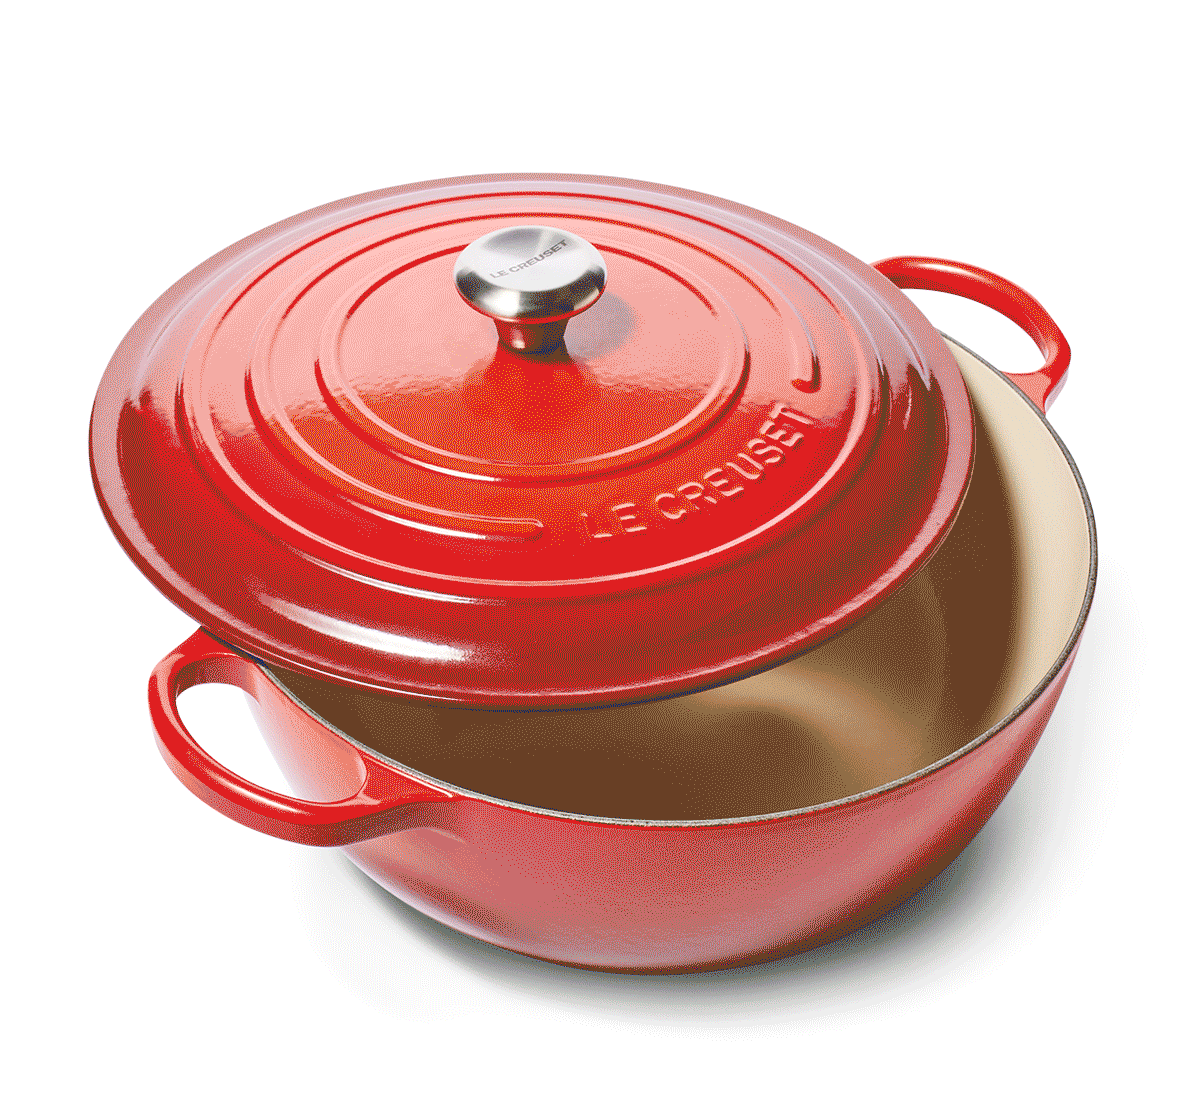 Last Chance from Le Creuset